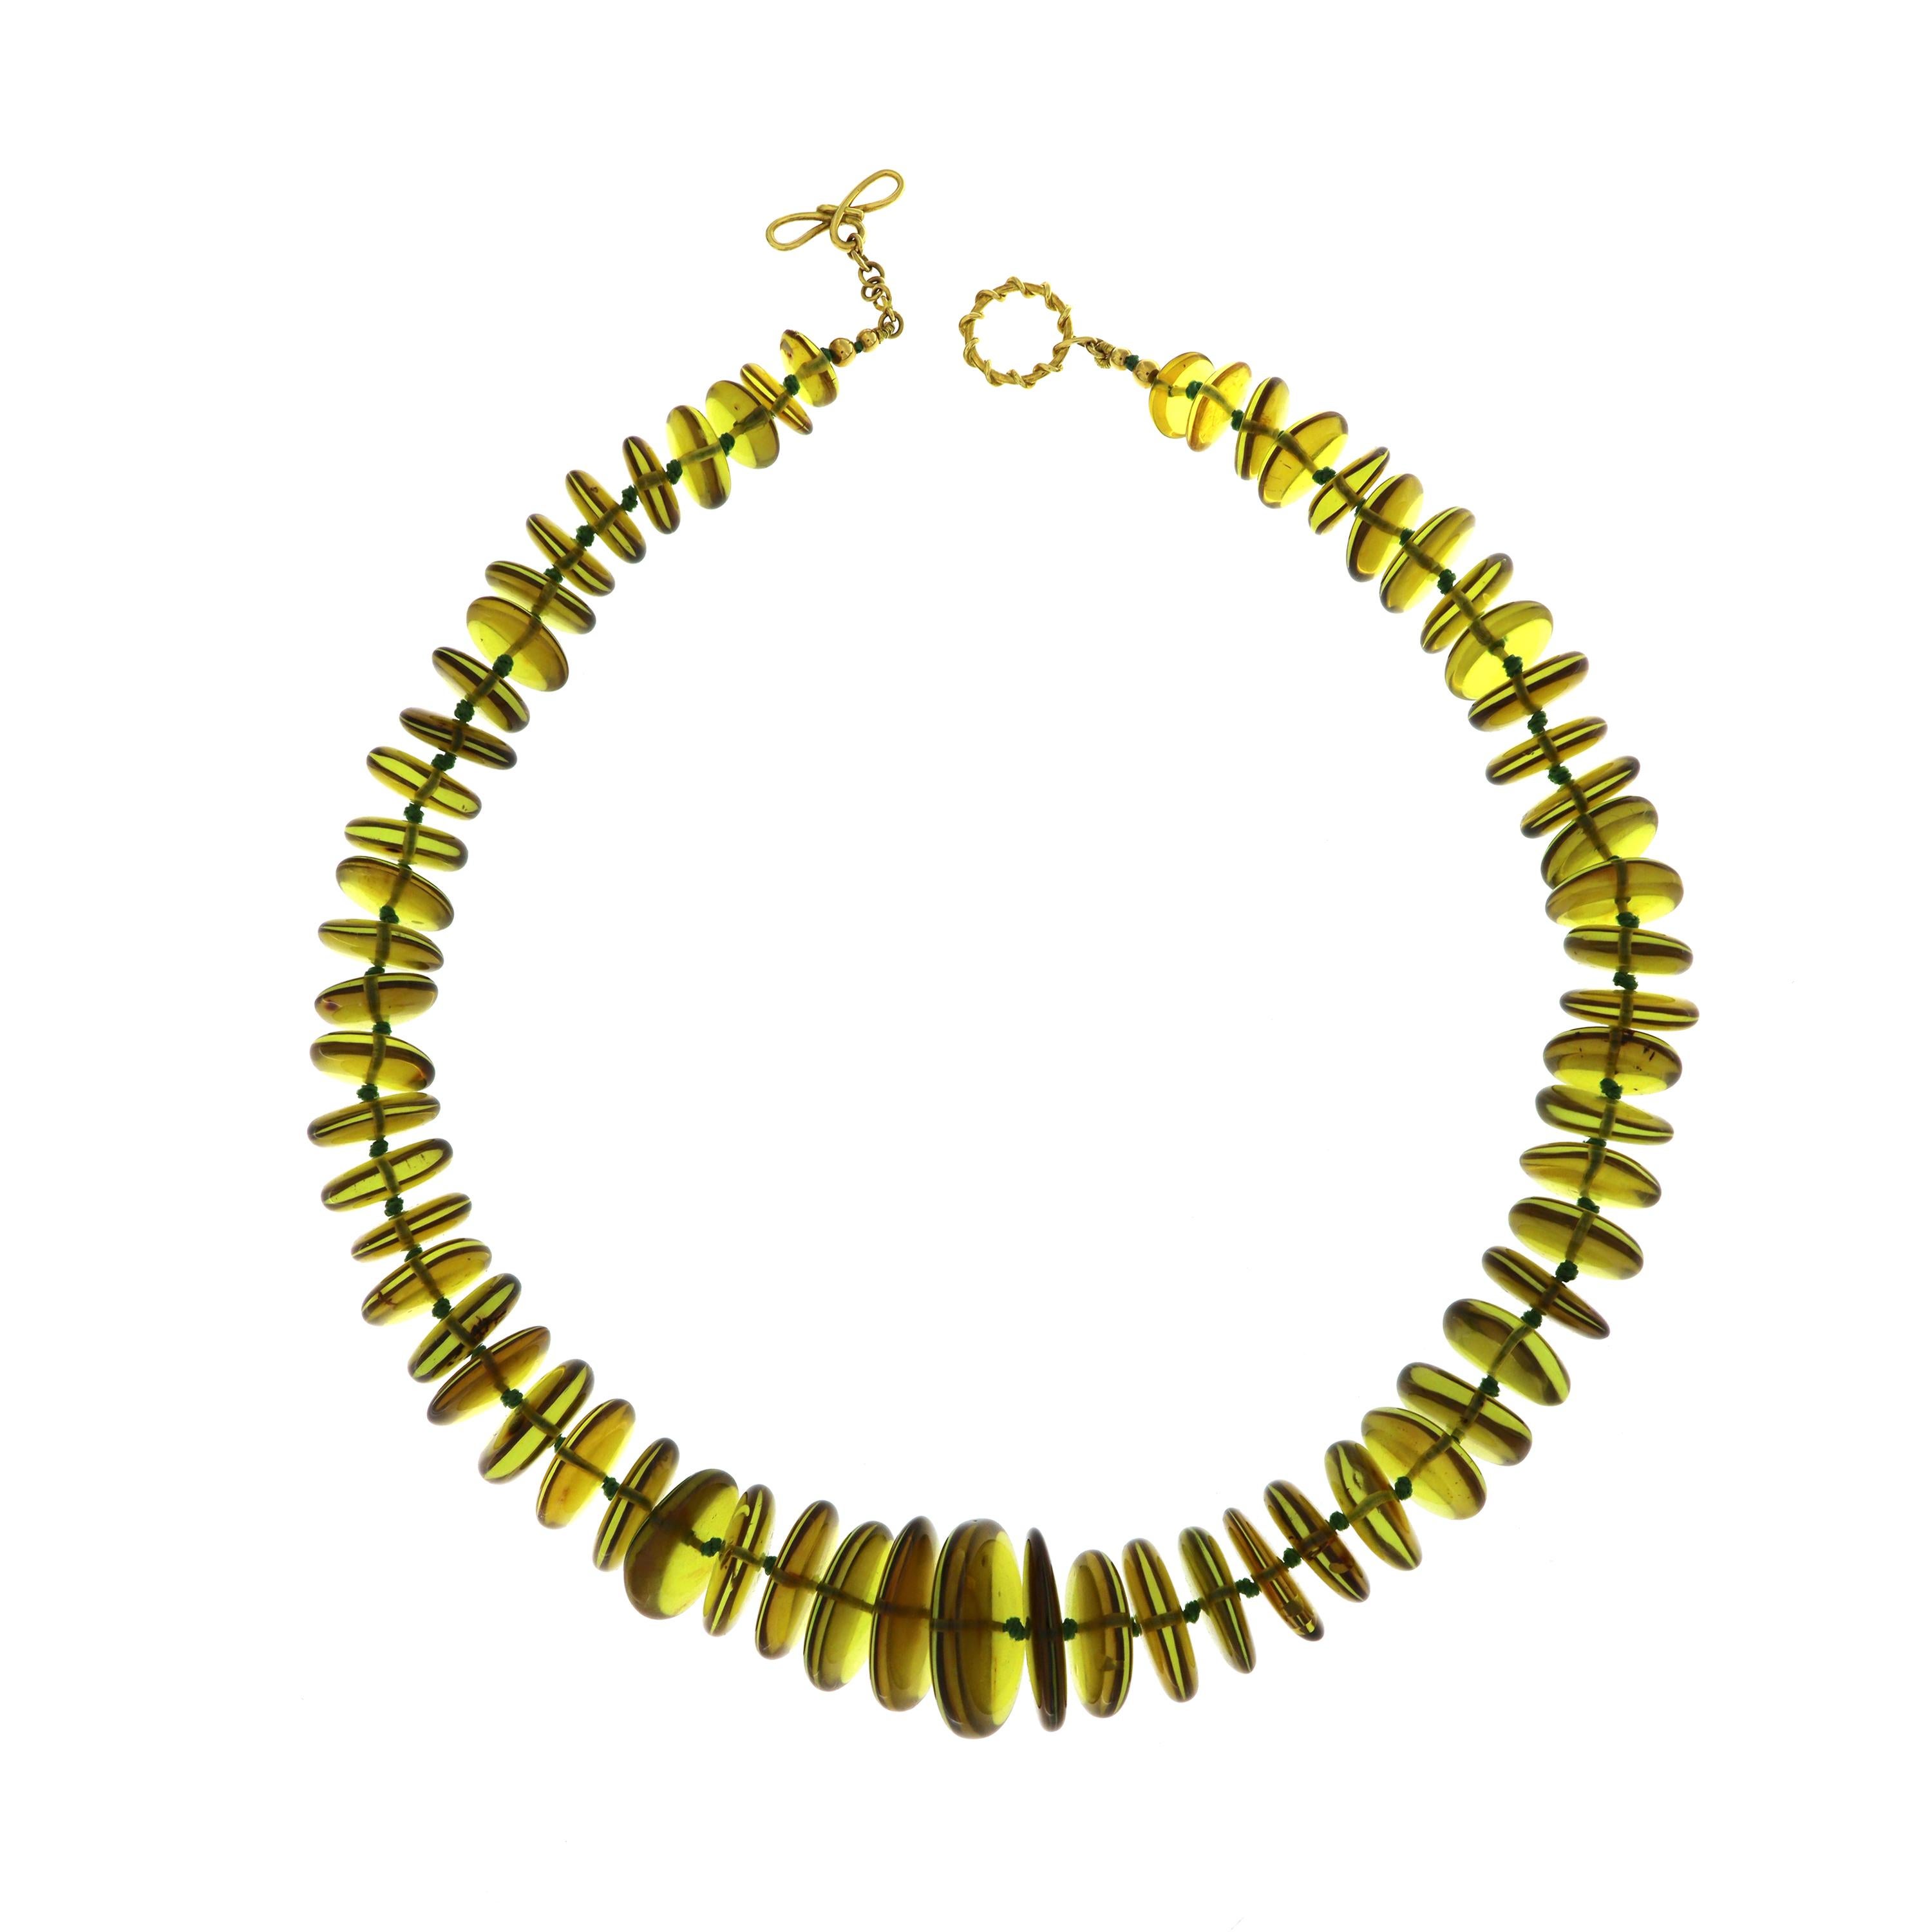 Valentin Magro Green Amber Disk Necklace seems to glow. Rather than the conventional golden brown, these gemstones showcase green hues. The jewels are carved into disks, with the smallest at the ends and largest in the center. An 18k yellow gold